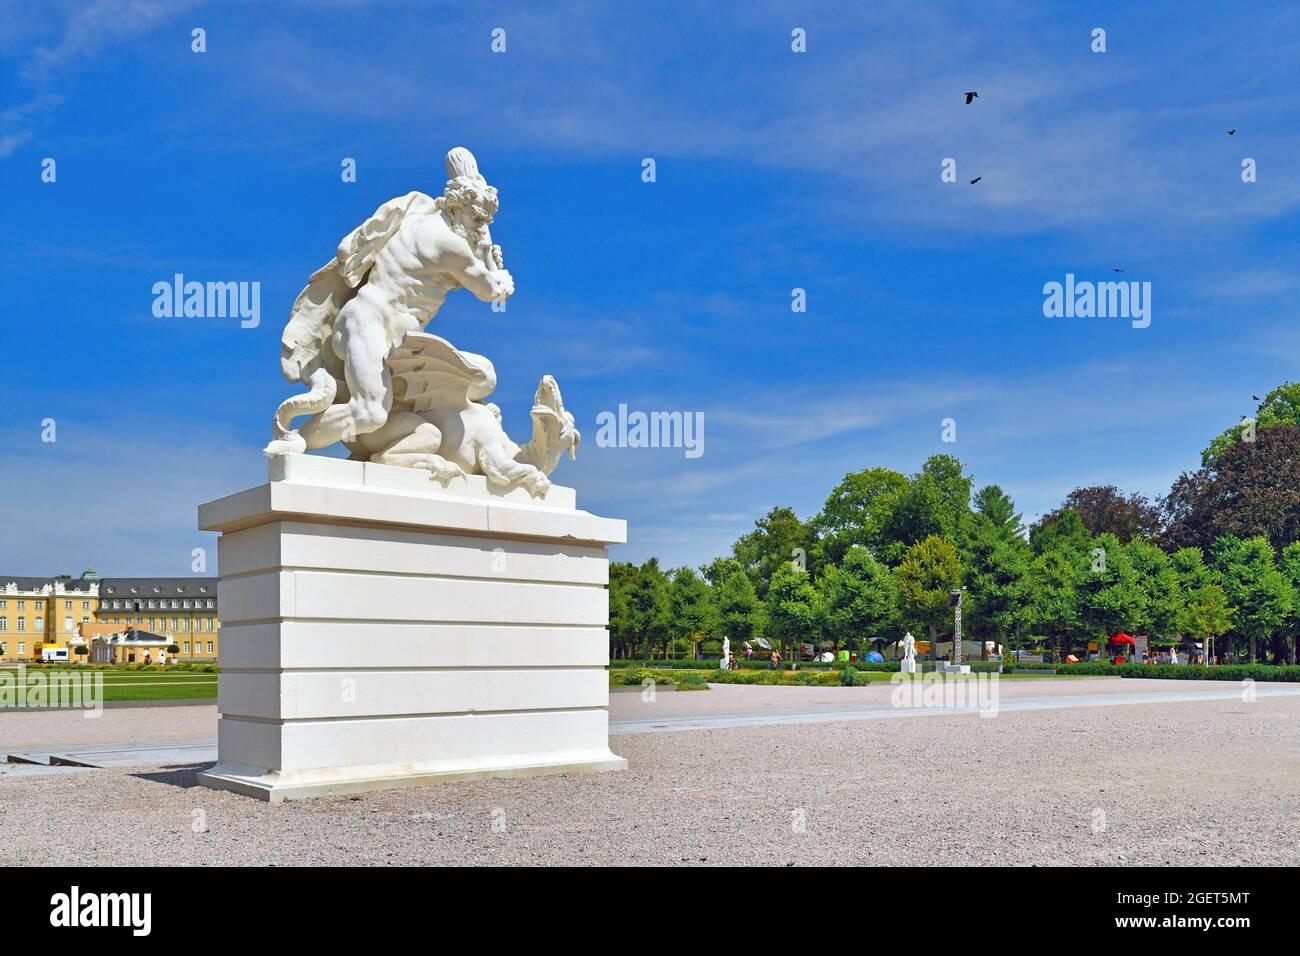 Karlsruhe, Germany - August 2021: Sculpture of Hercules slaying dragon Ladon in front of palace garden Stock Photo